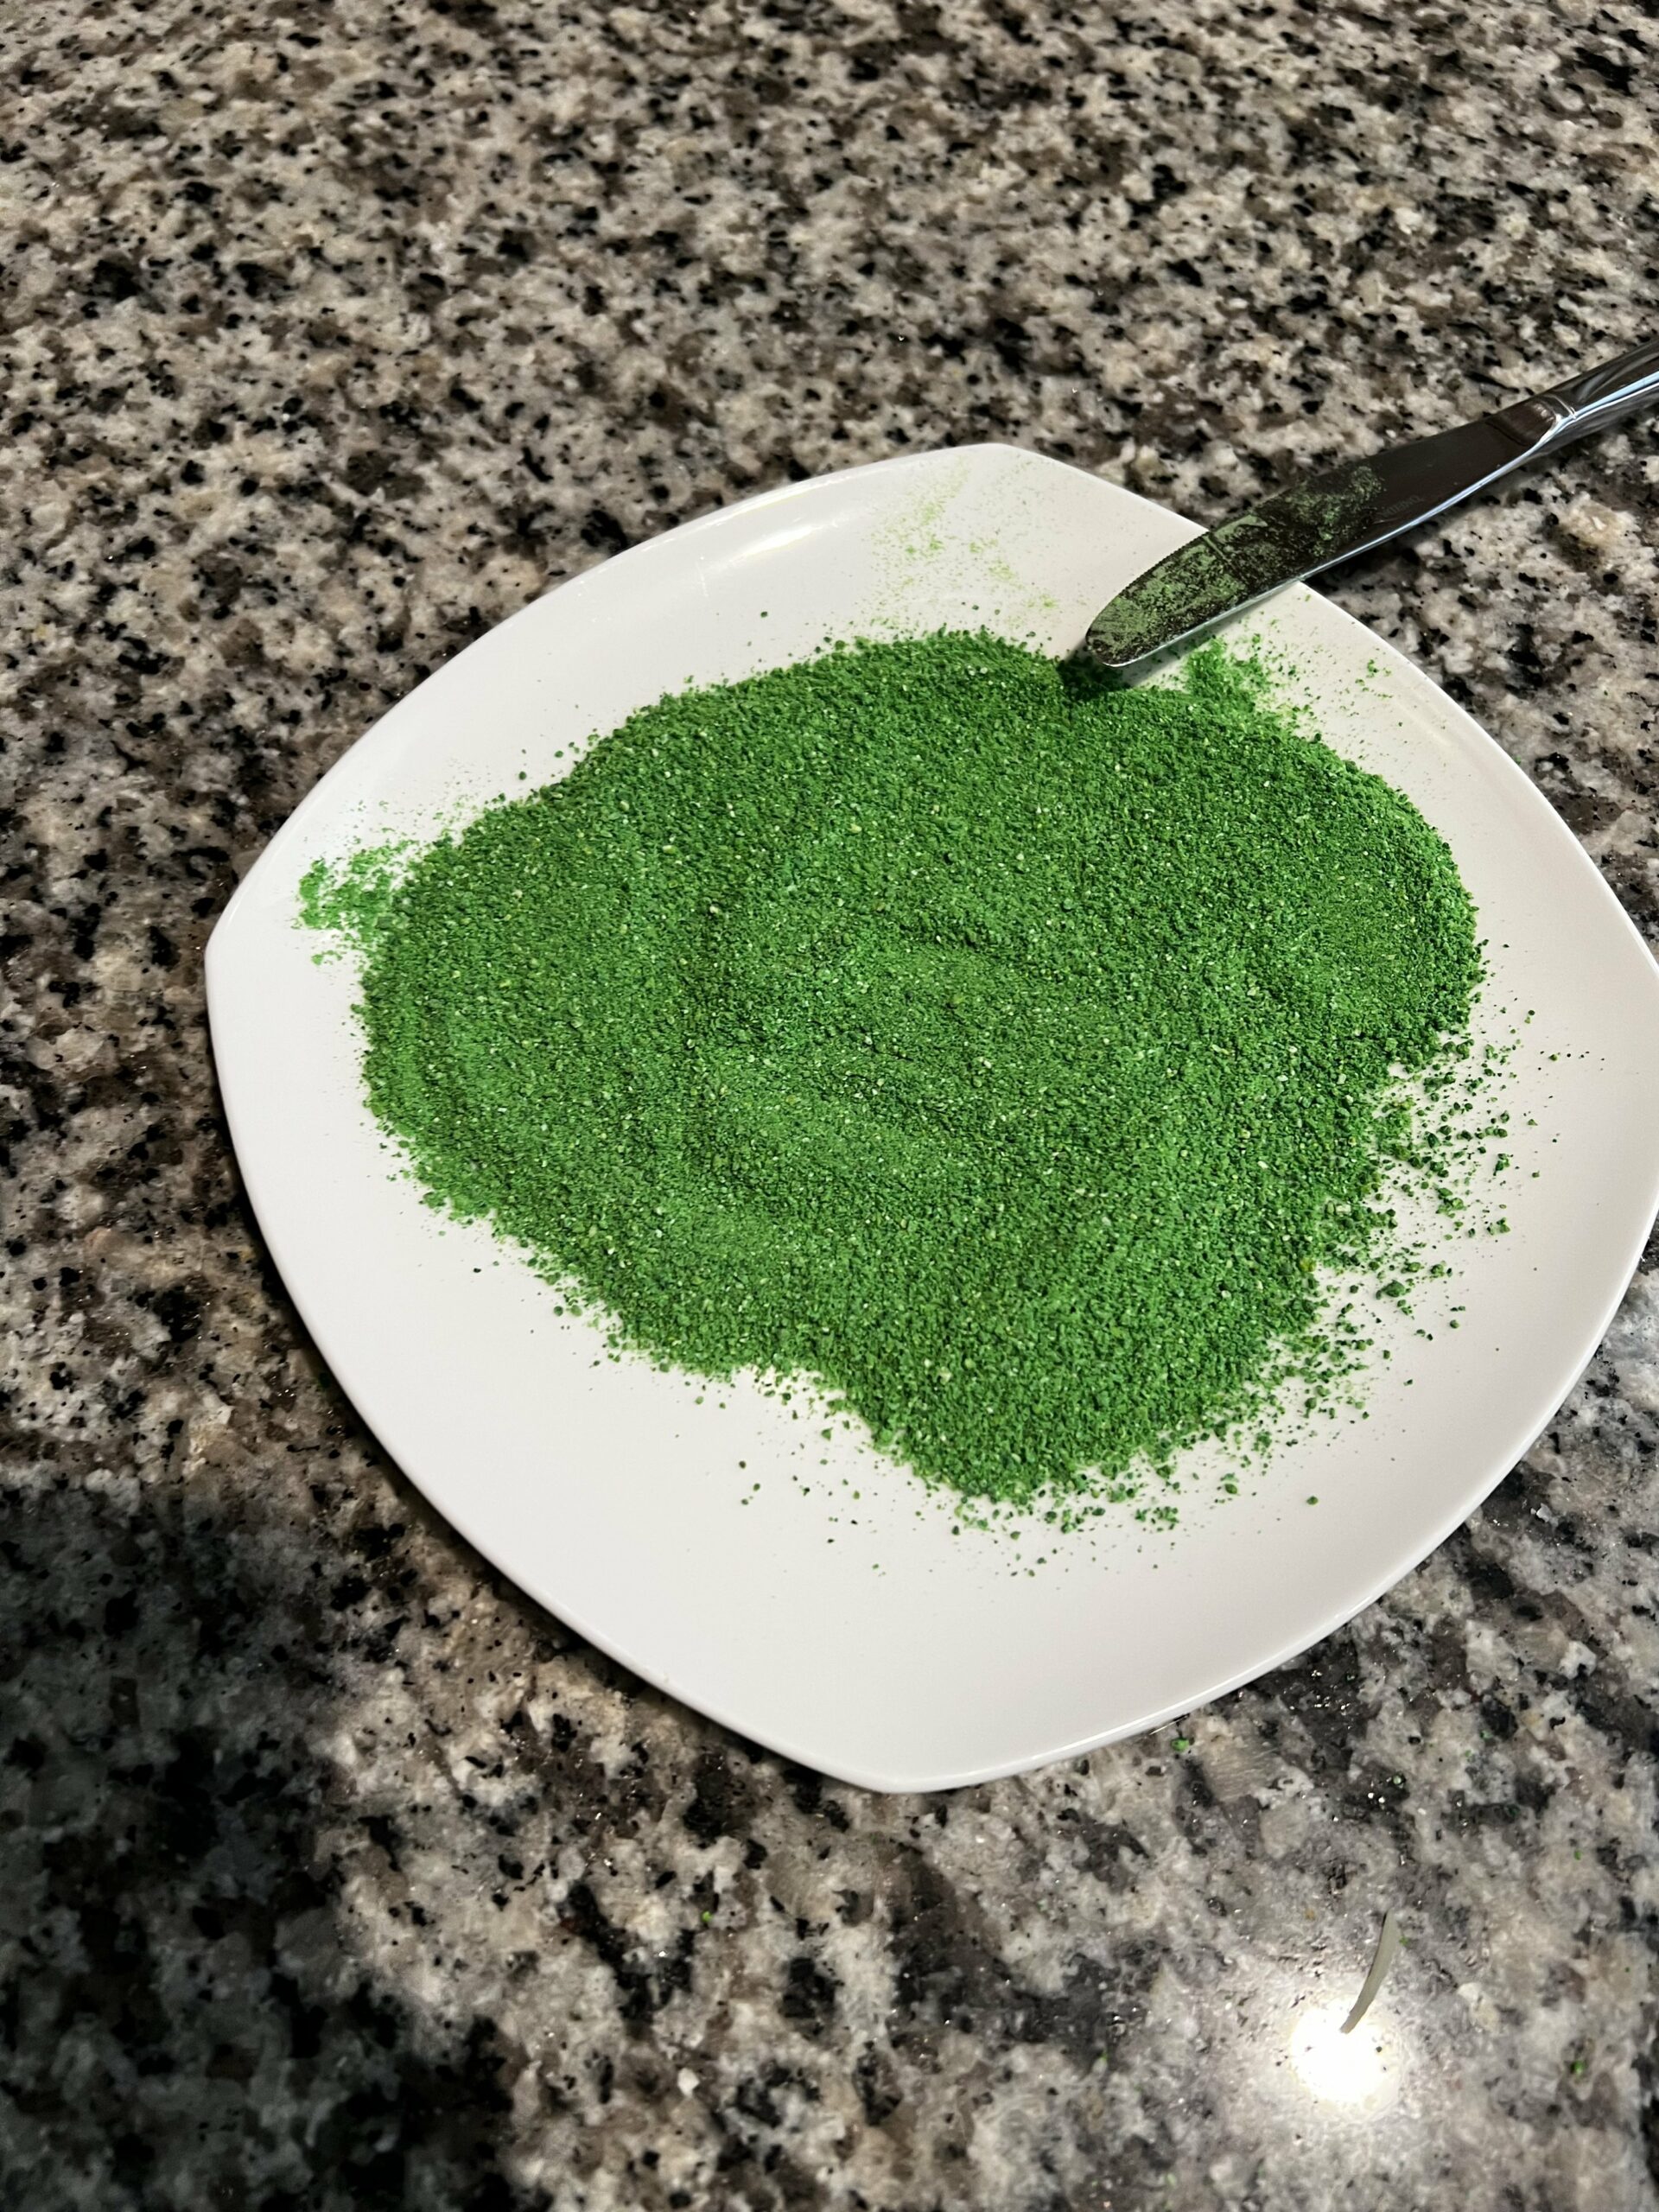 dyed green flour on a plate